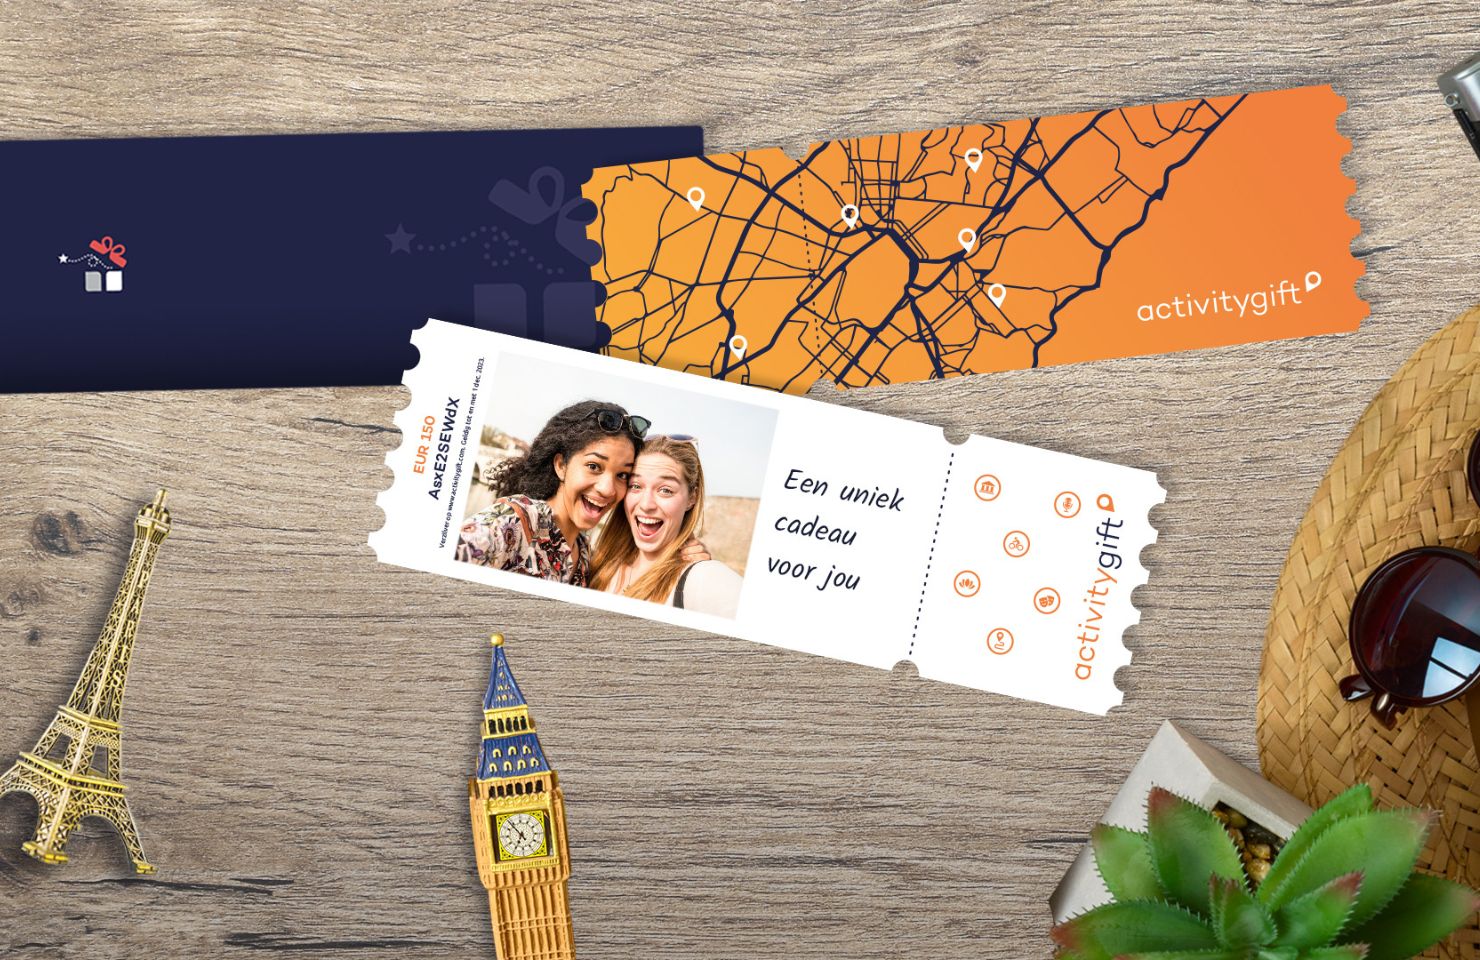 Better than socks: Activitygift gift card with two girls on it